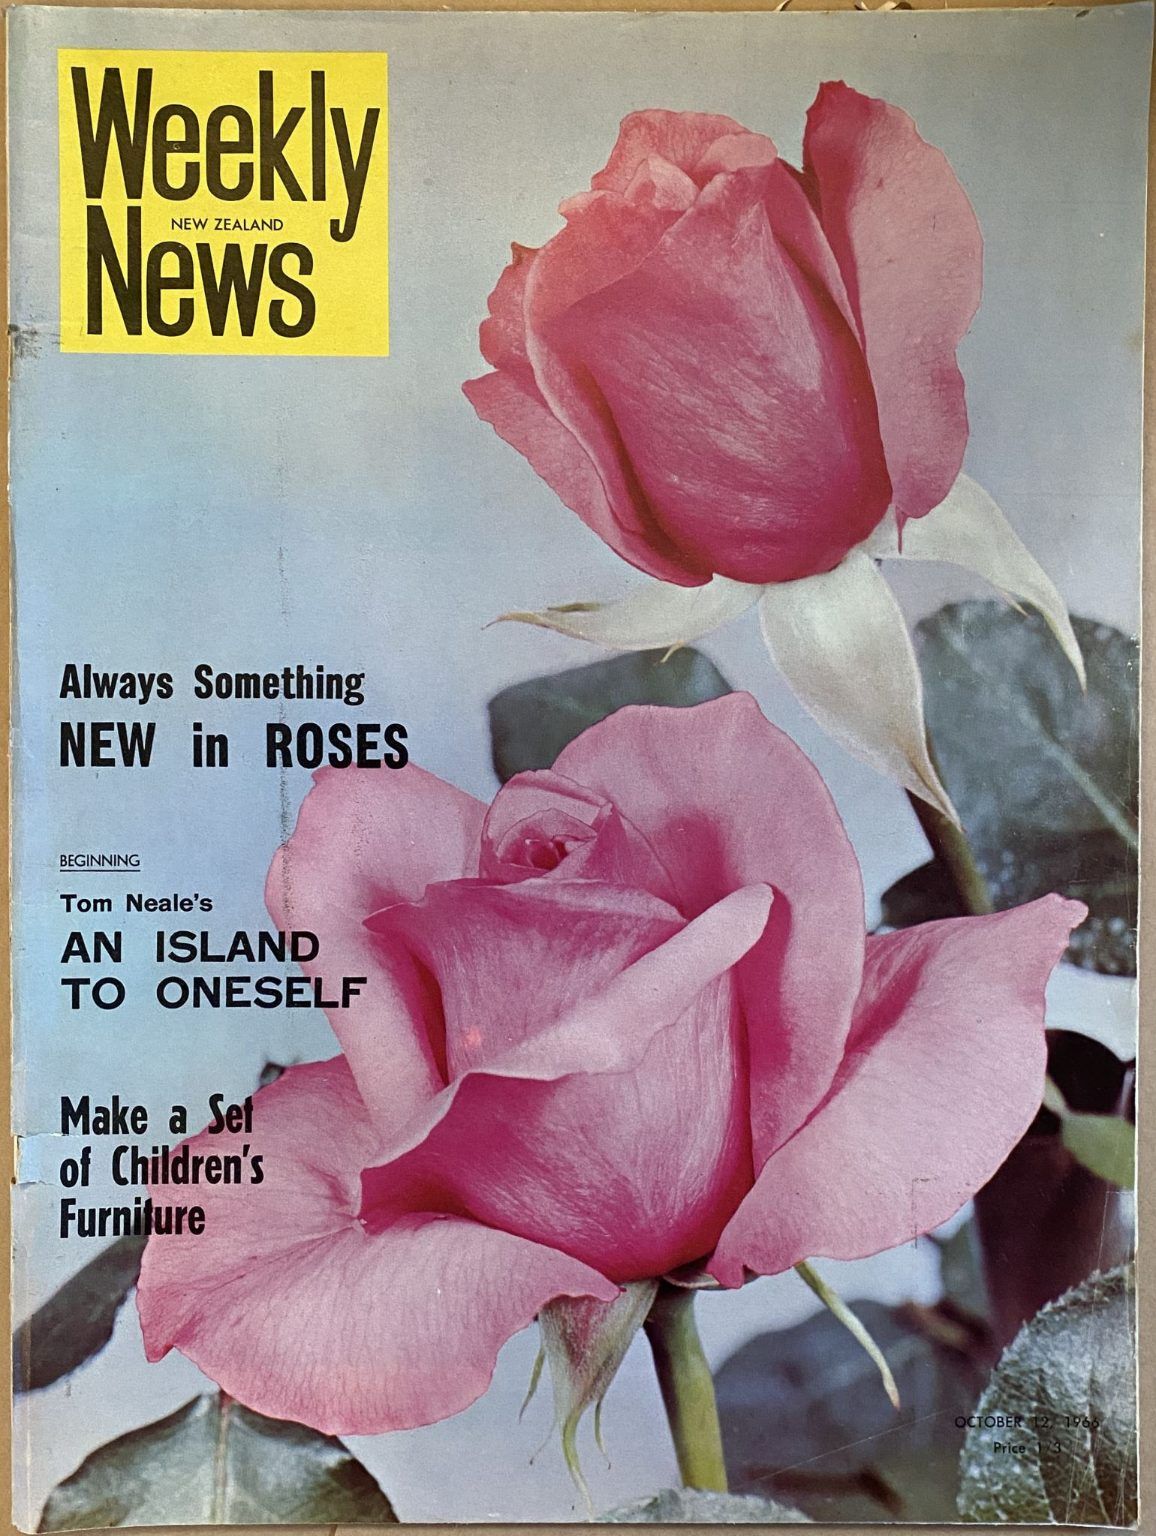 OLD NEWSPAPER: New Zealand Weekly News, No. 5368, 12 October 1966